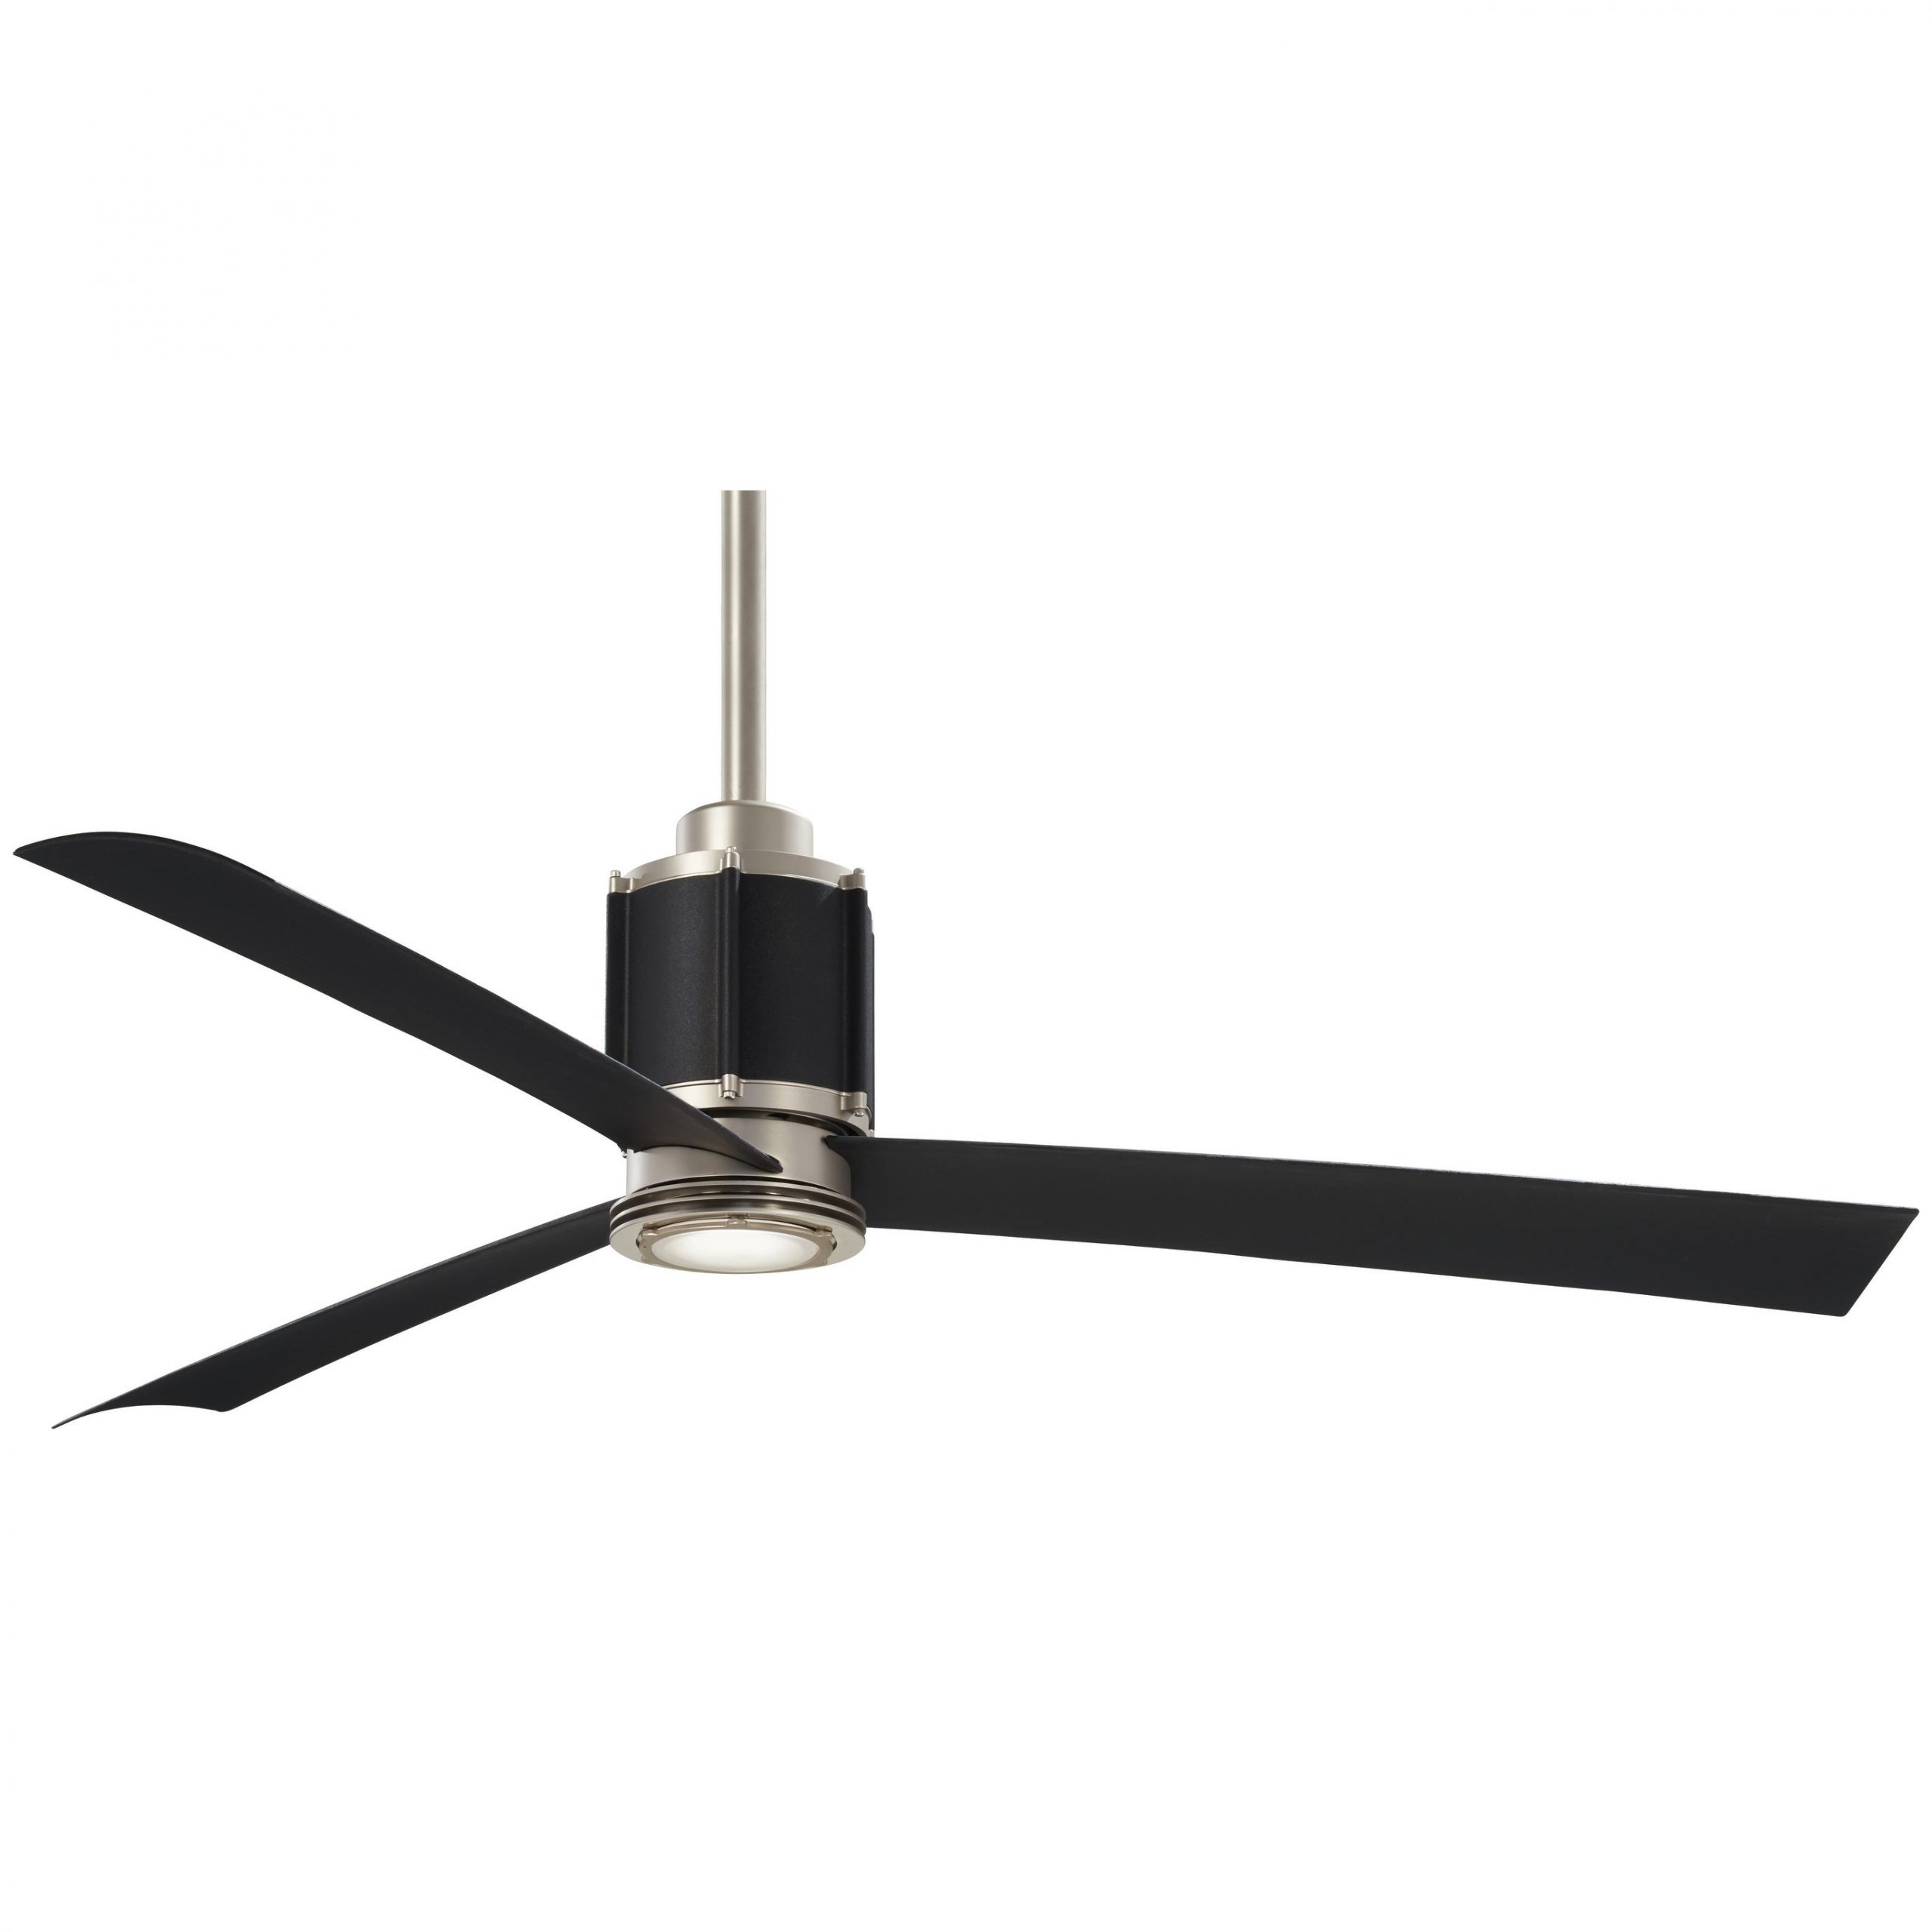 Gear 54 Led Ceiling Fan In Brushed Steelsand Black Finish Wmatte Black Blades throughout dimensions 2754 X 2754